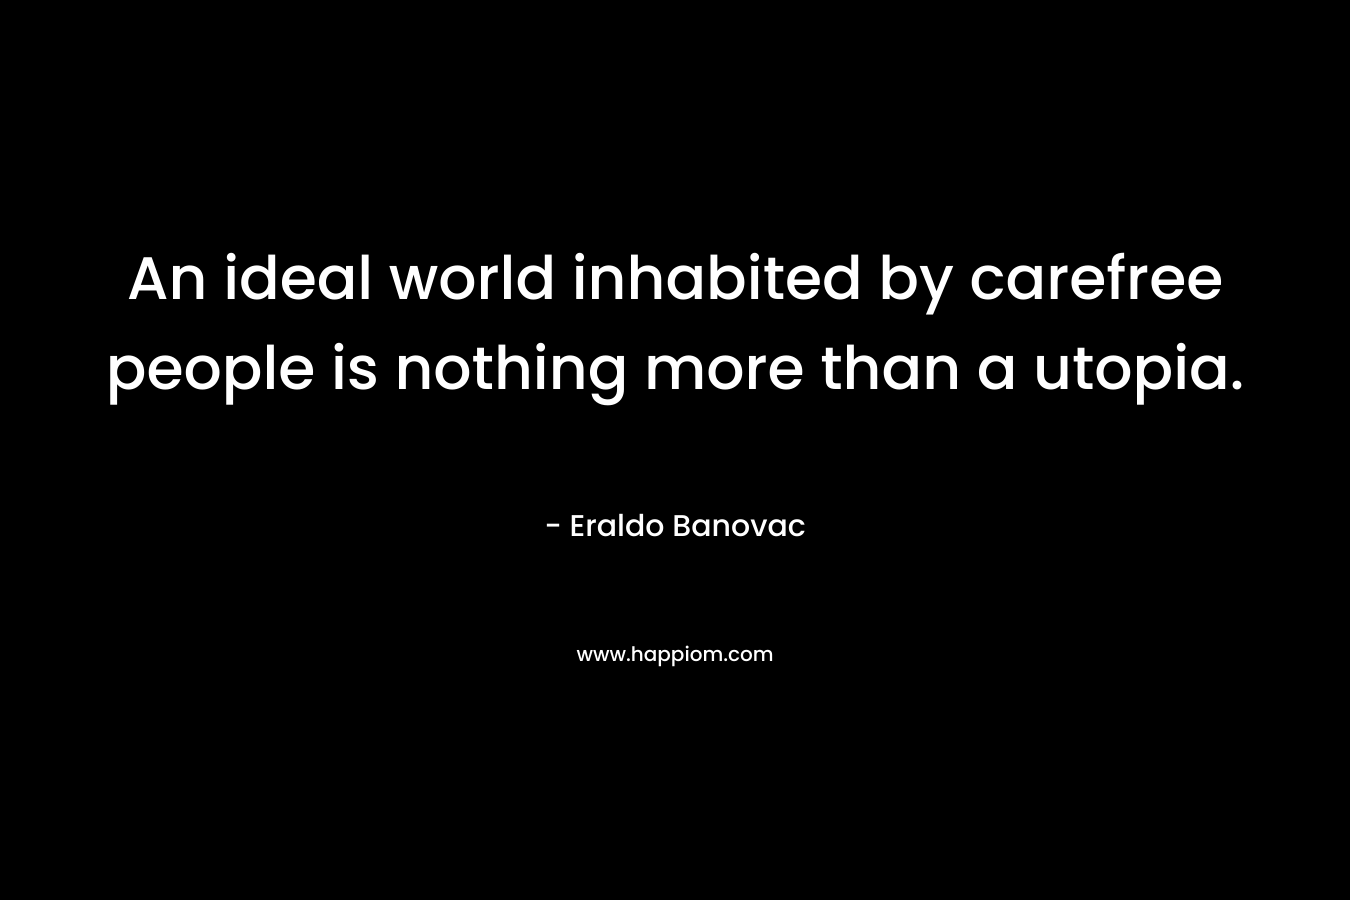 An ideal world inhabited by carefree people is nothing more than a utopia. – Eraldo Banovac